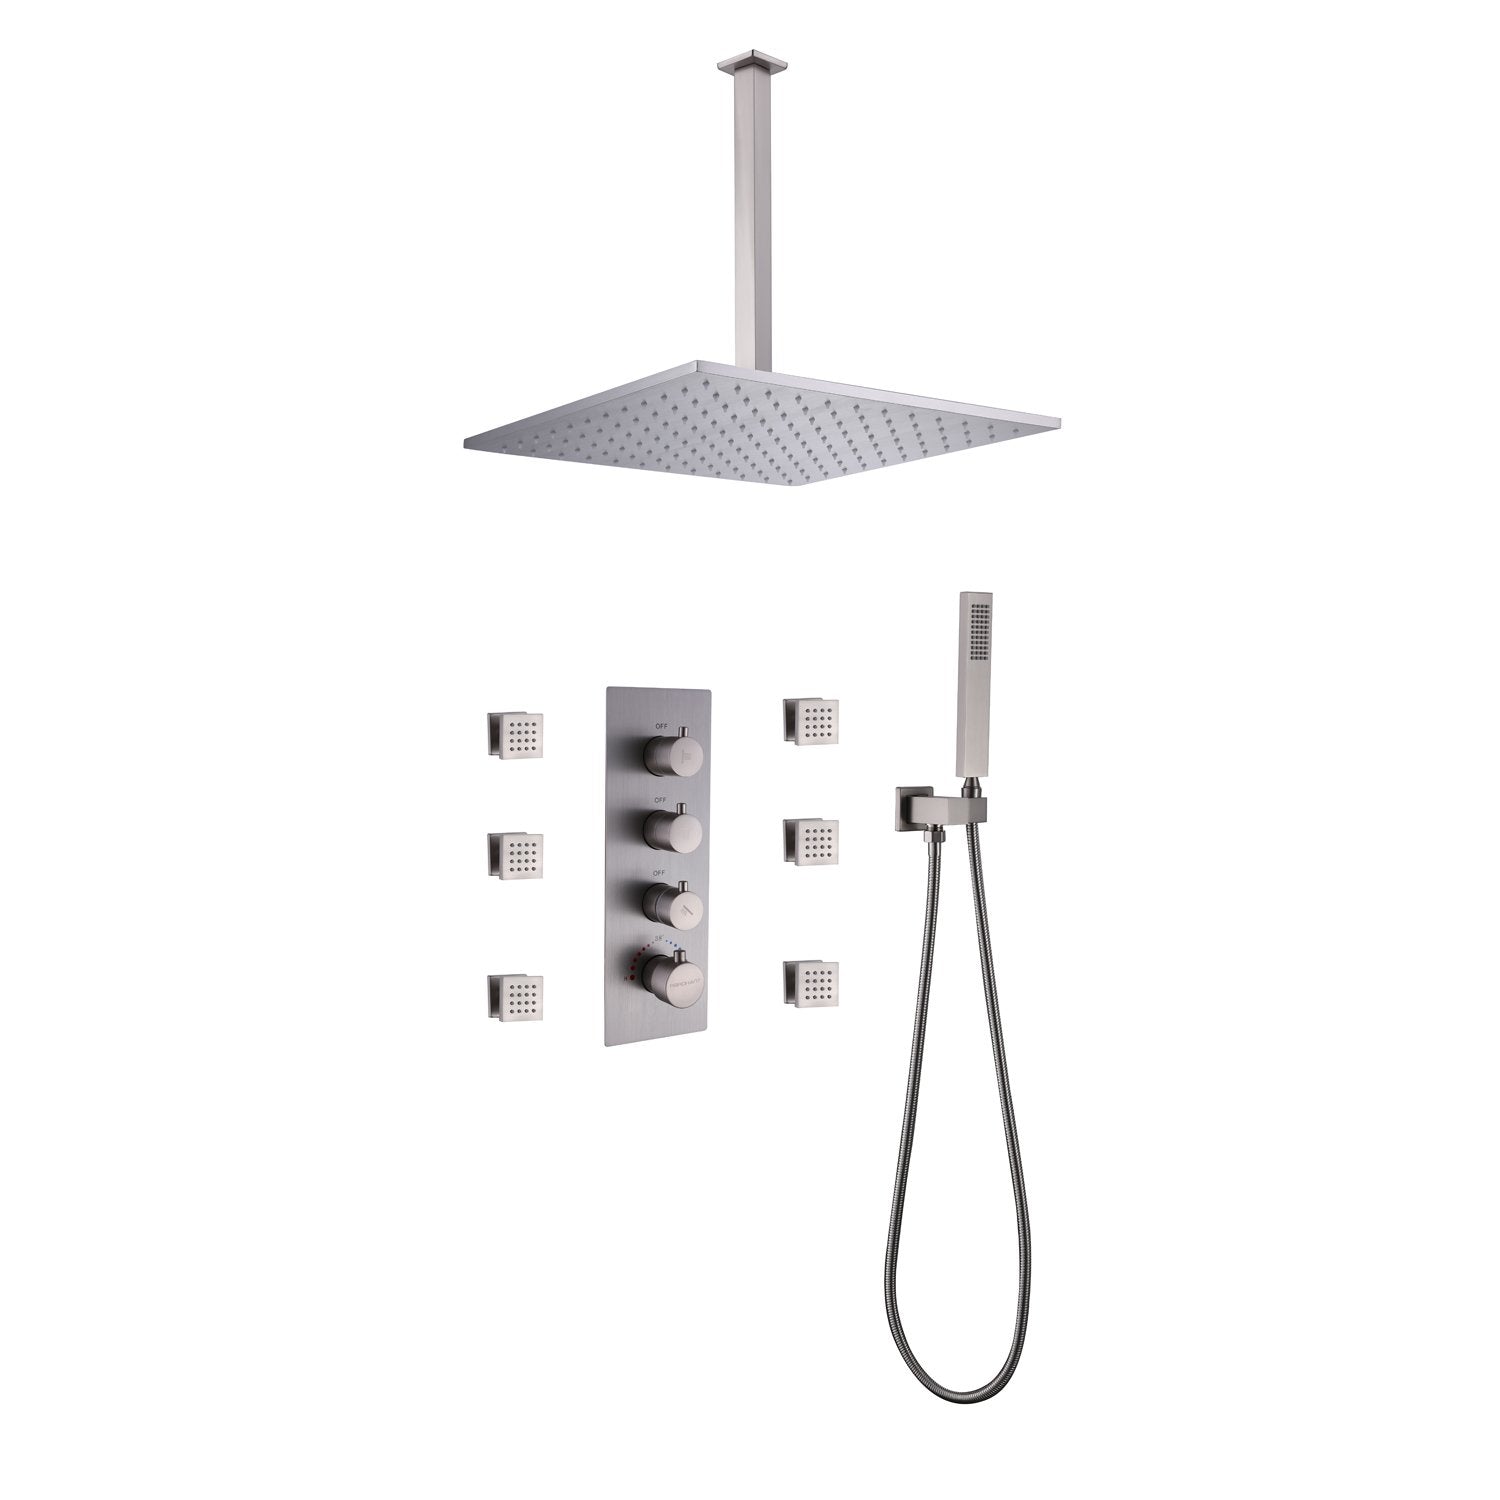 Luxury 16 in. 6 -Jet Thermostatic Mixer Shower System Combo Set Shower Head and Handshower in Brushed